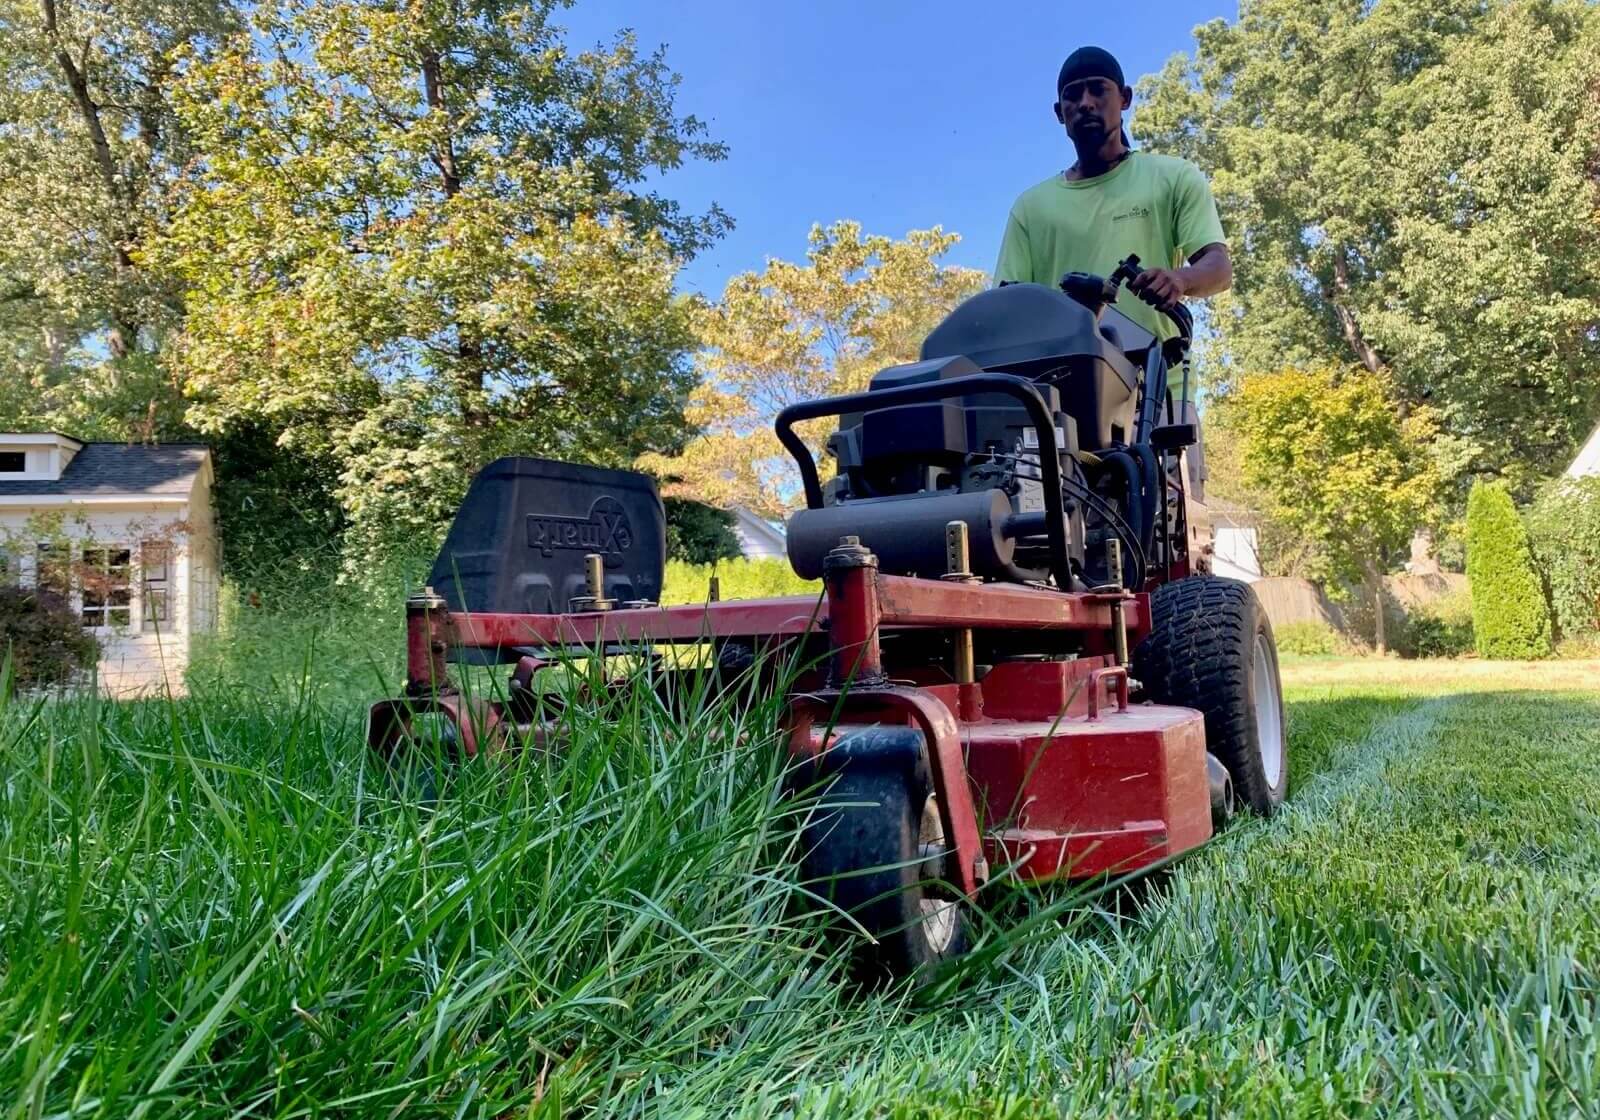 Enjoy More Summer With Our Richmond, VA Lawn Mowing Service